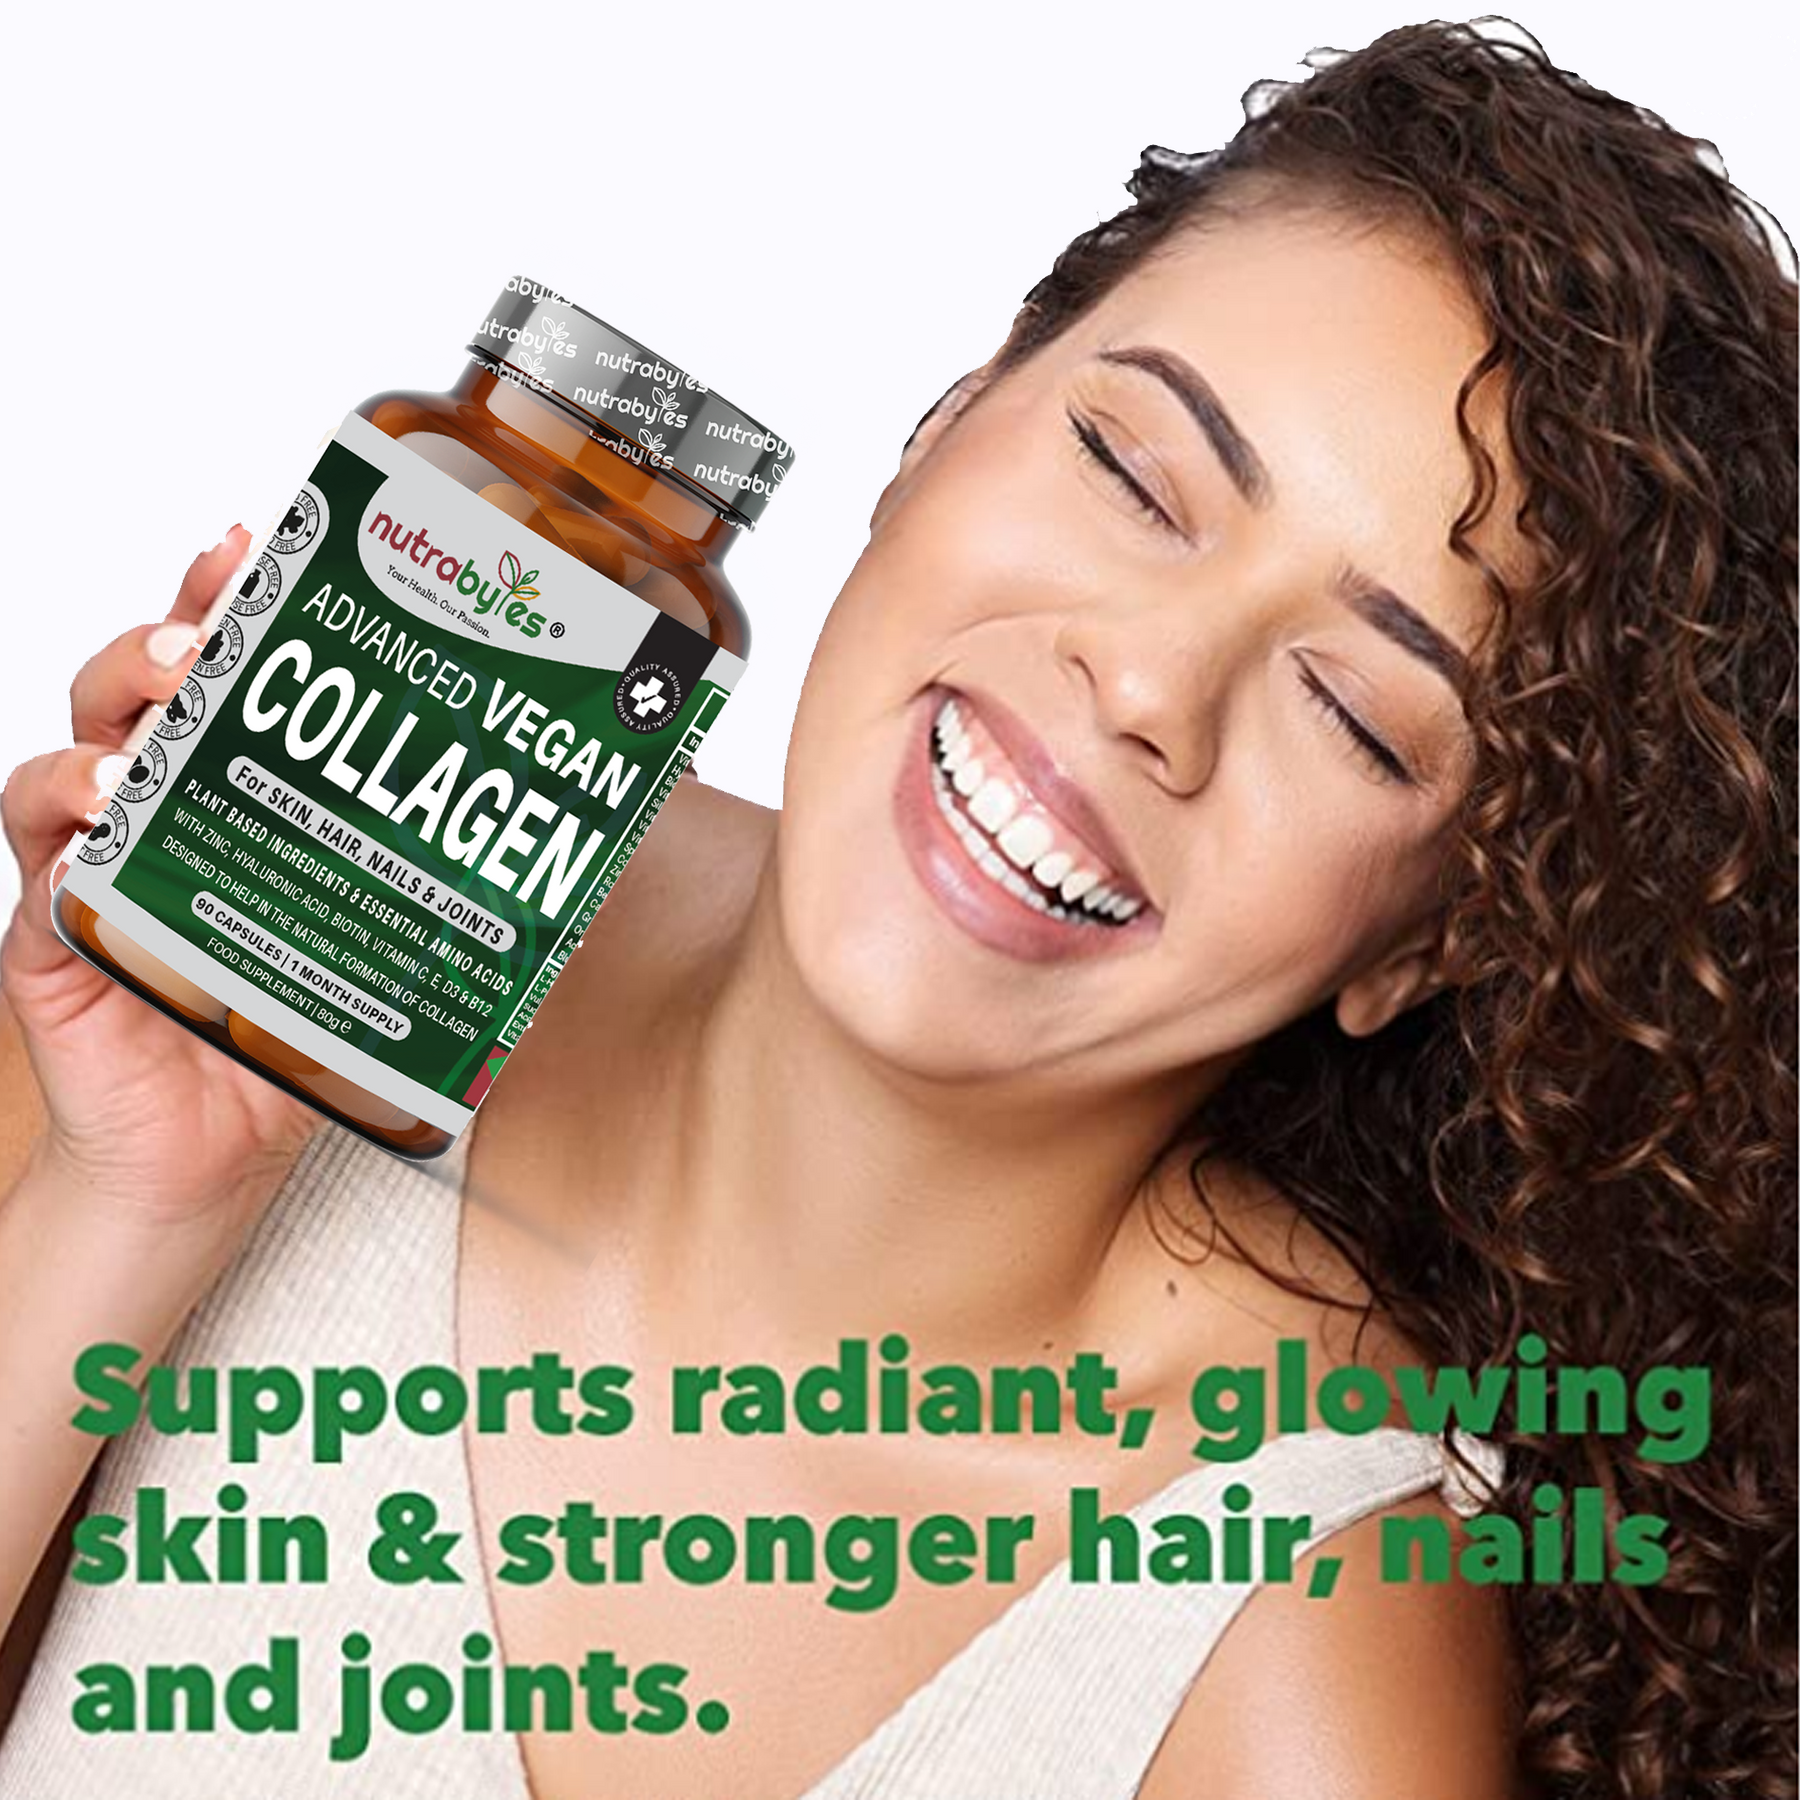 Advanced Vegan Collagen | Powerful Plant Based Ingredients Including Essential Amino Acids | 90 Capsules | 1 Month Supply | Hair, Skin, Nails and Joints | Men & Women | Made in UK